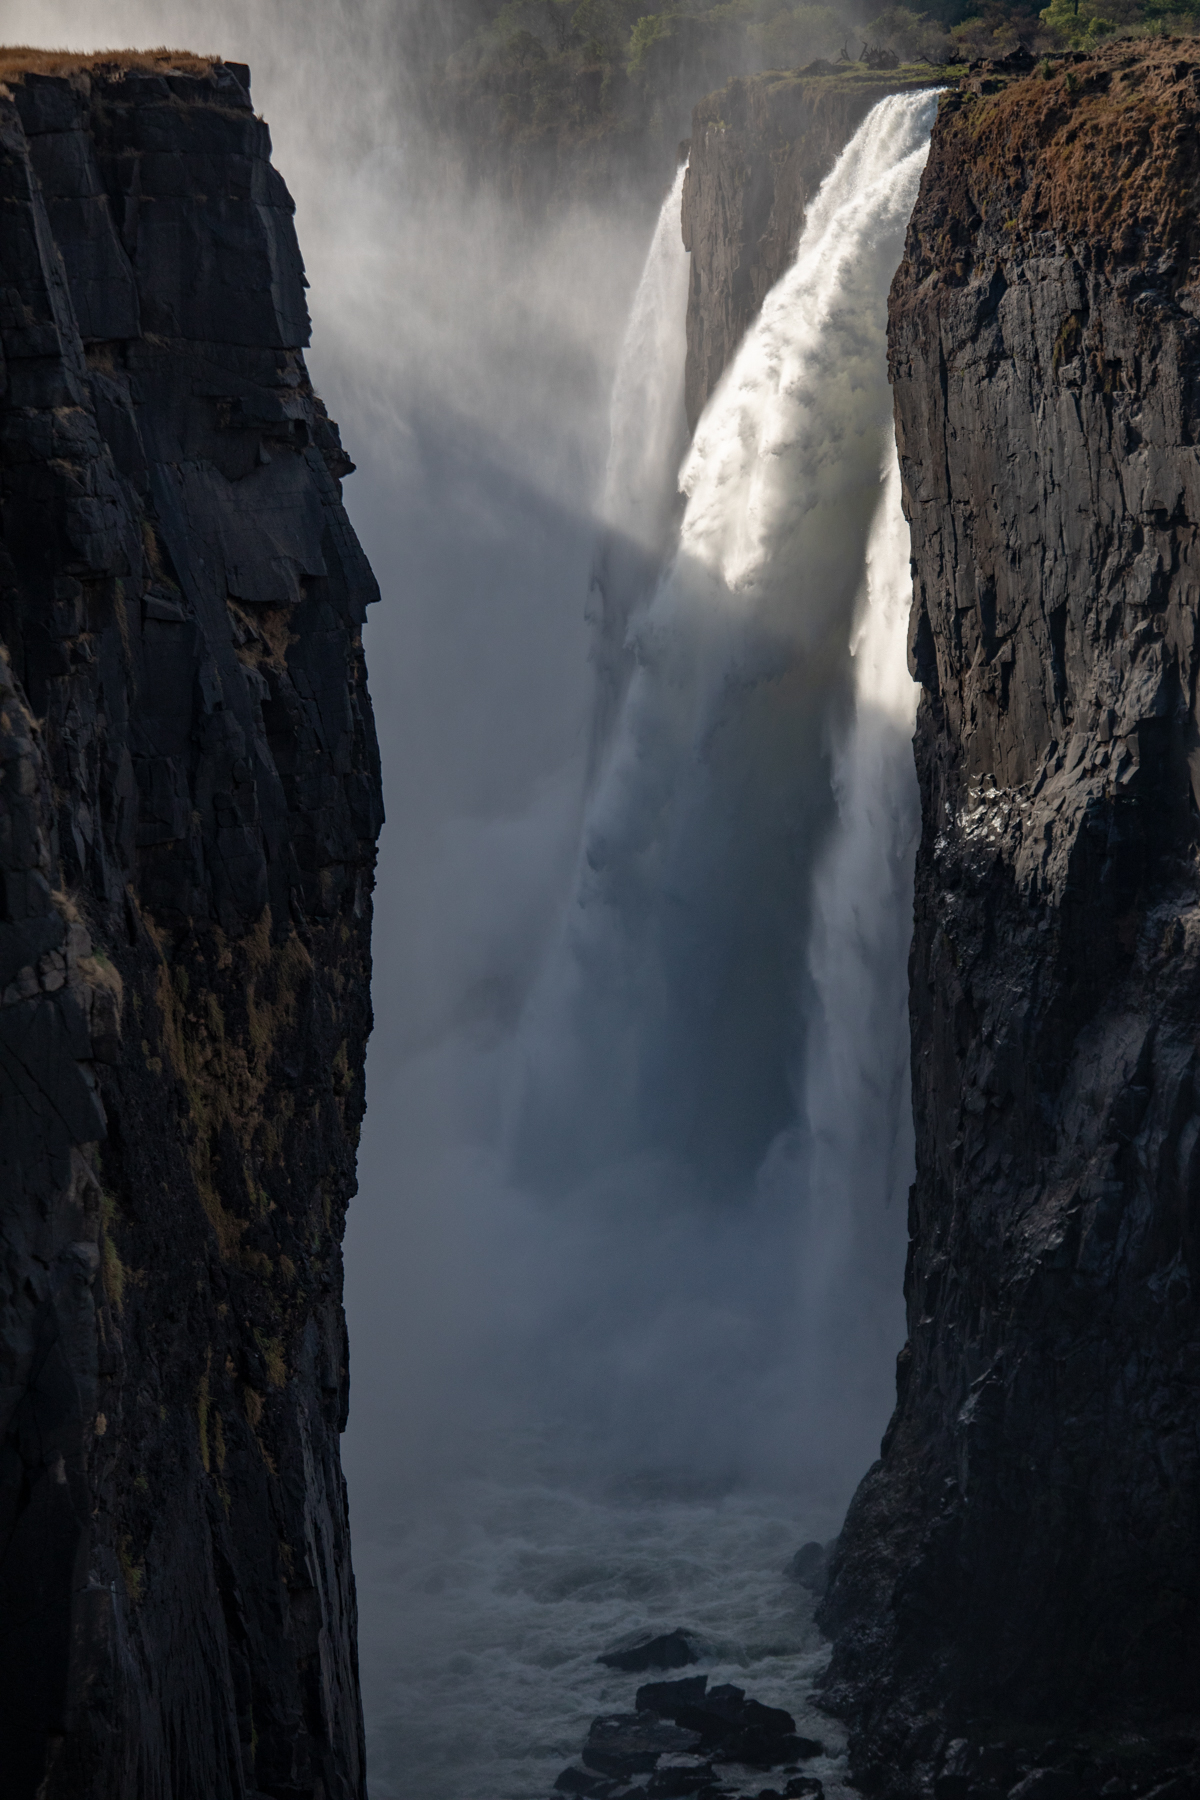 One of the spray-filled chasms at the Victoria Falls, Zimbabwe/Zambia border